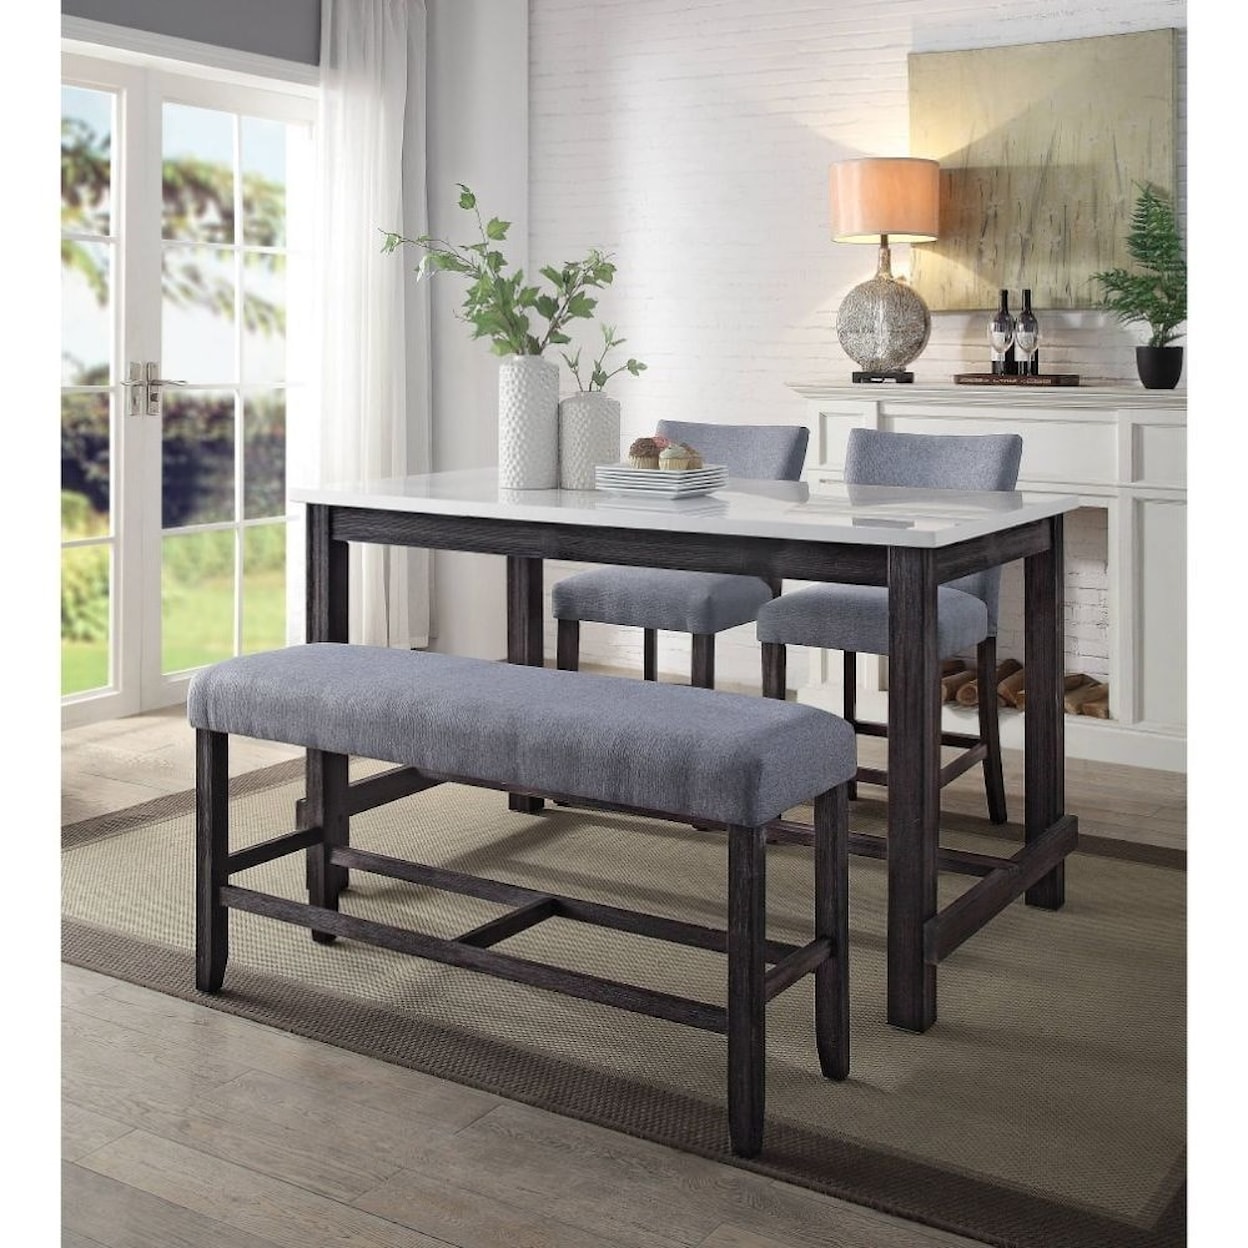 Acme Furniture Yelena Table & Chair Set with Bench